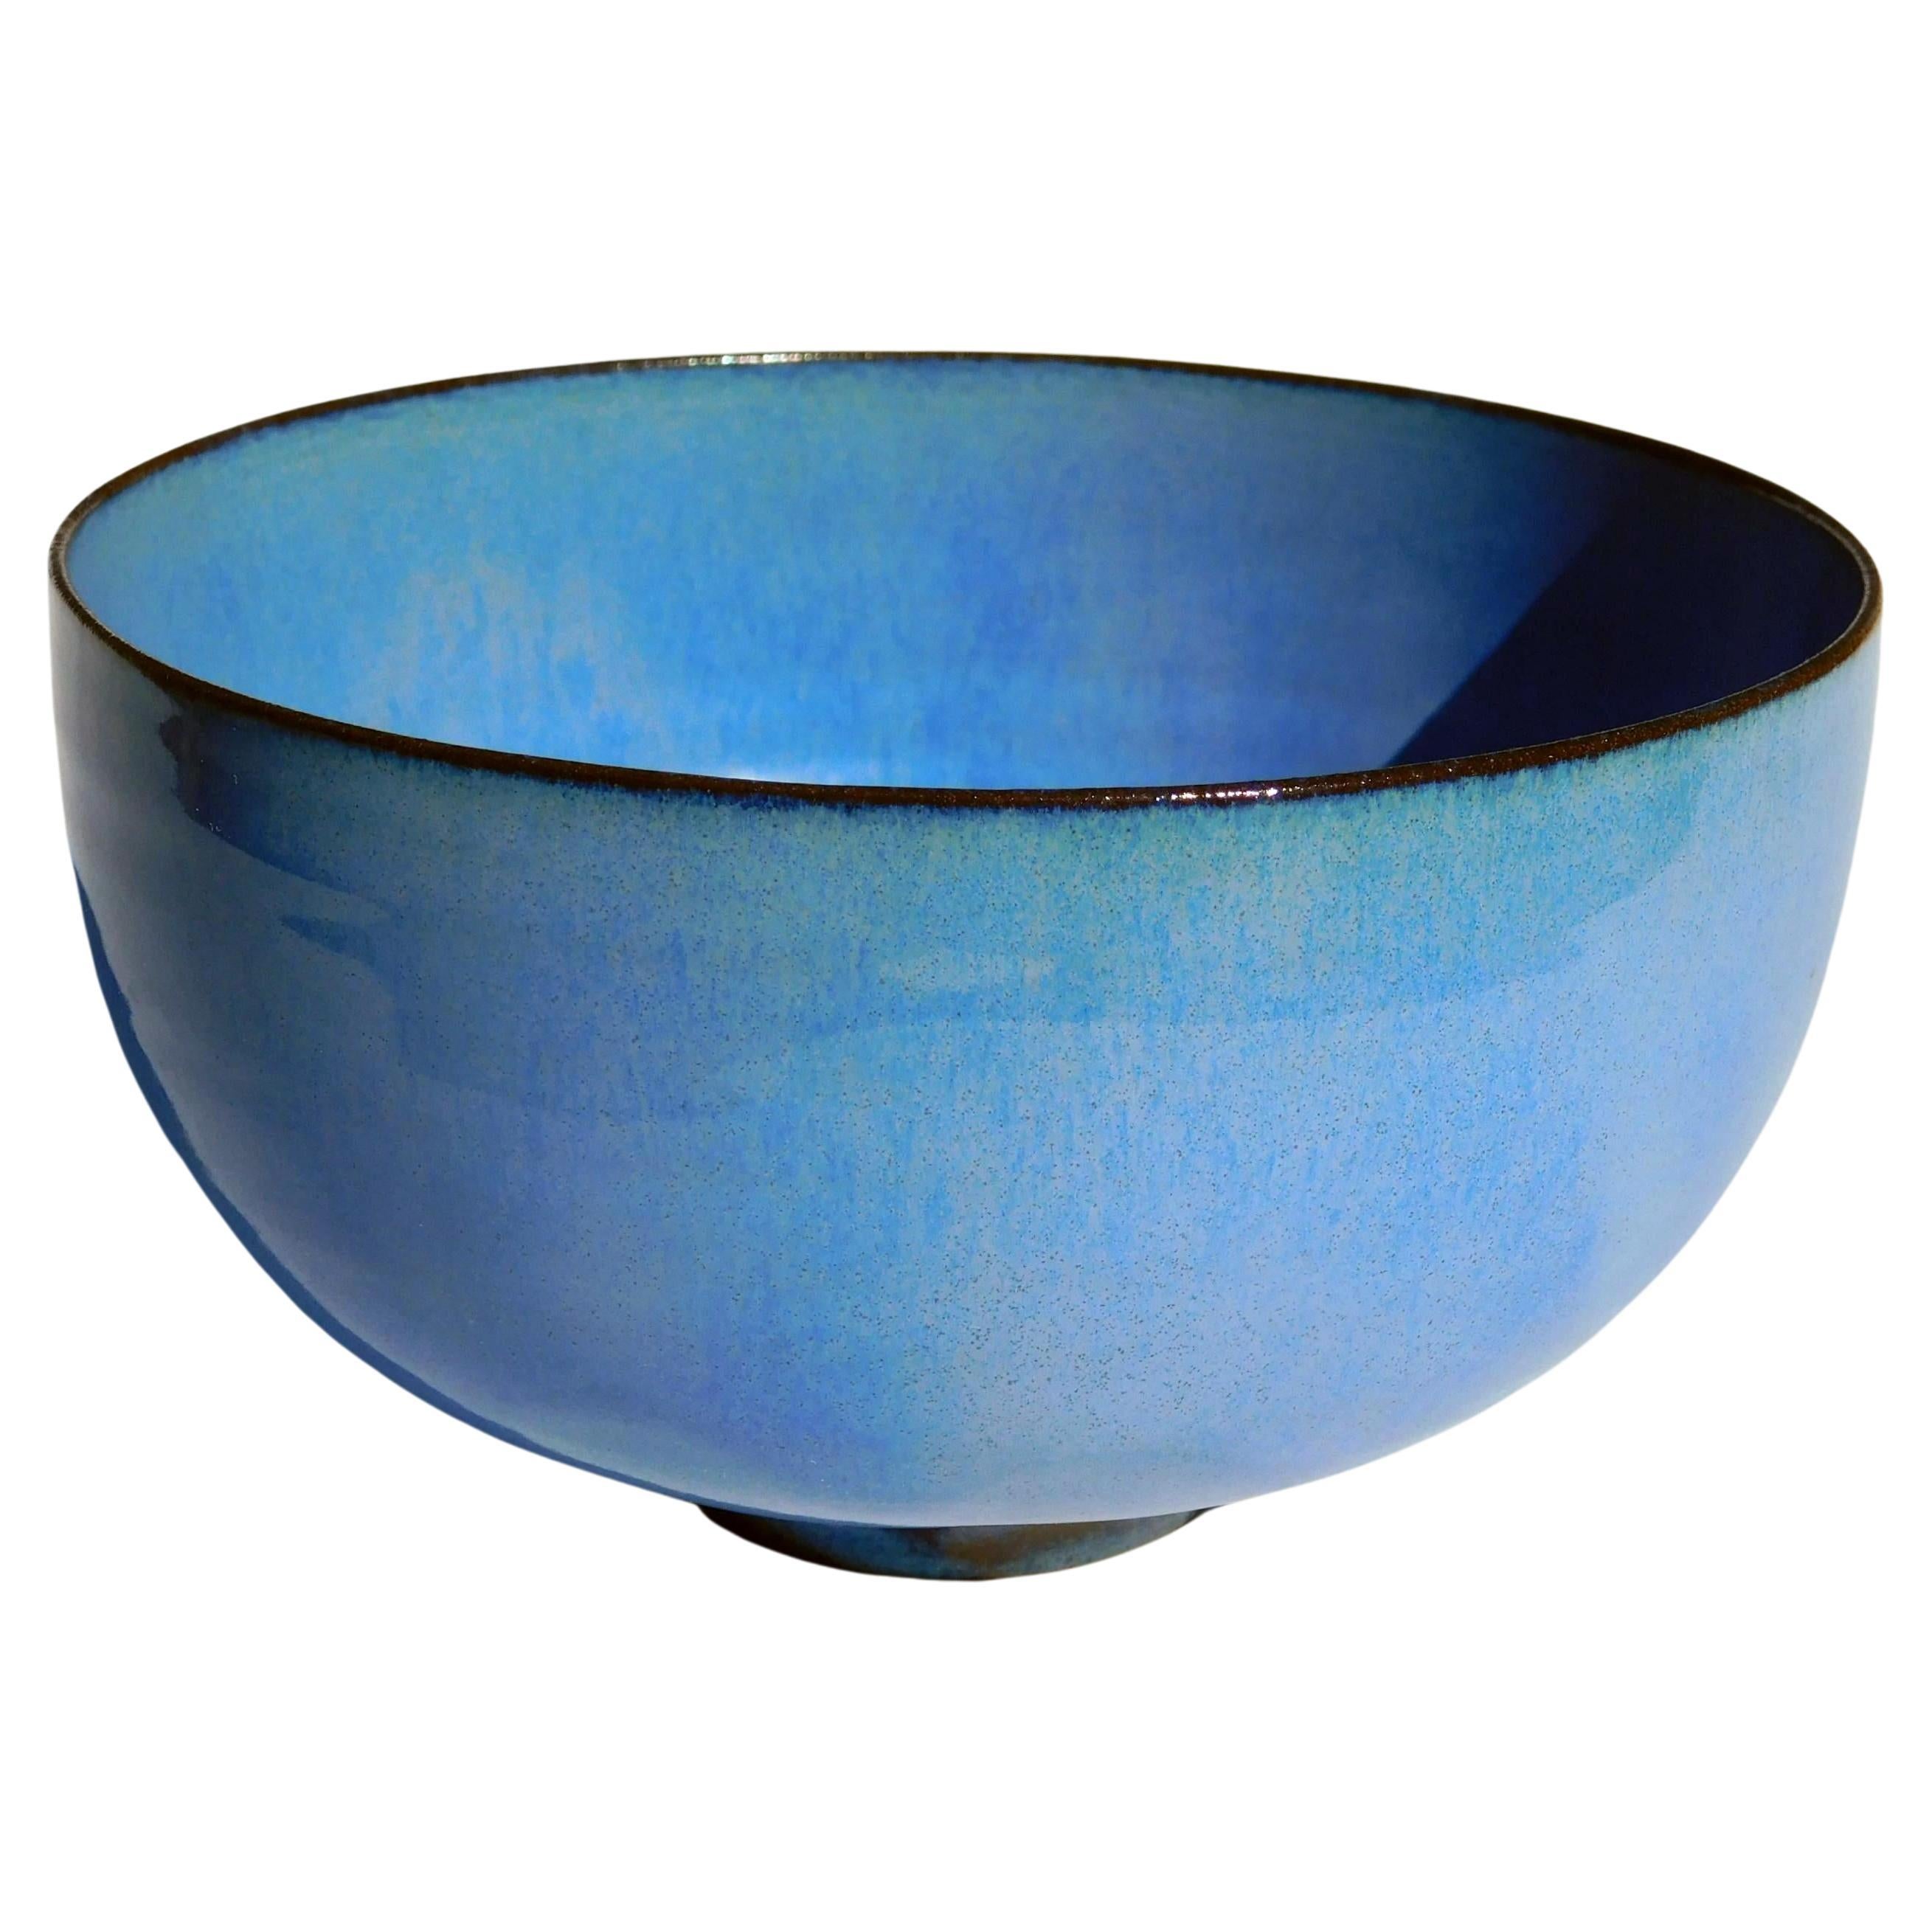 Gertrud and Otto Natzler Footed Studio Bowl, 1966 - Robin’s Egg Blue For Sale